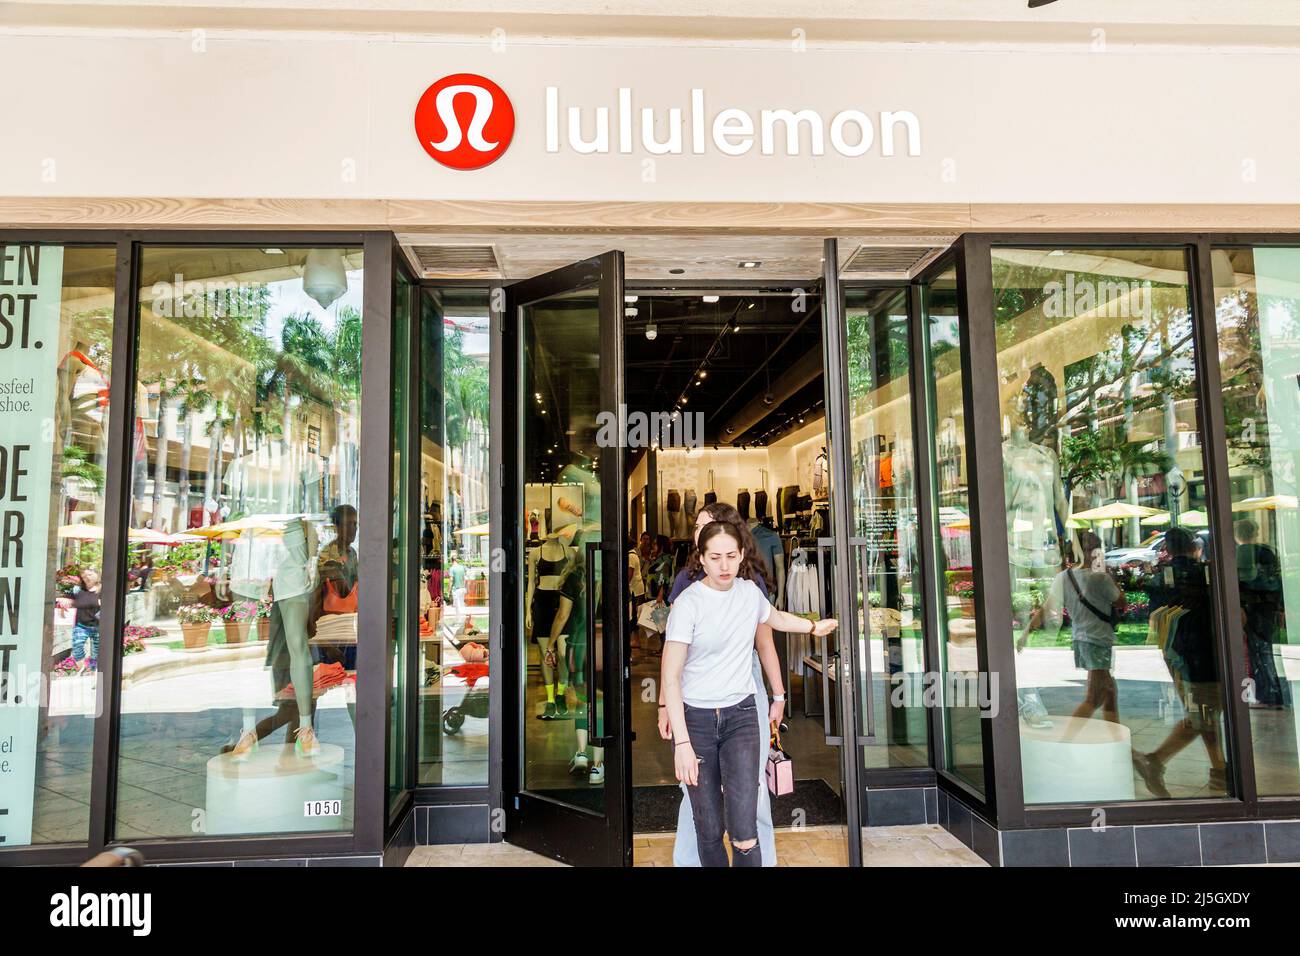 Miami Florida Coral Gables Shops at Merrick Park upscale outdoor shopping mall outside exterior entrance Lululemon Athletica athletic apparel Stock Photo